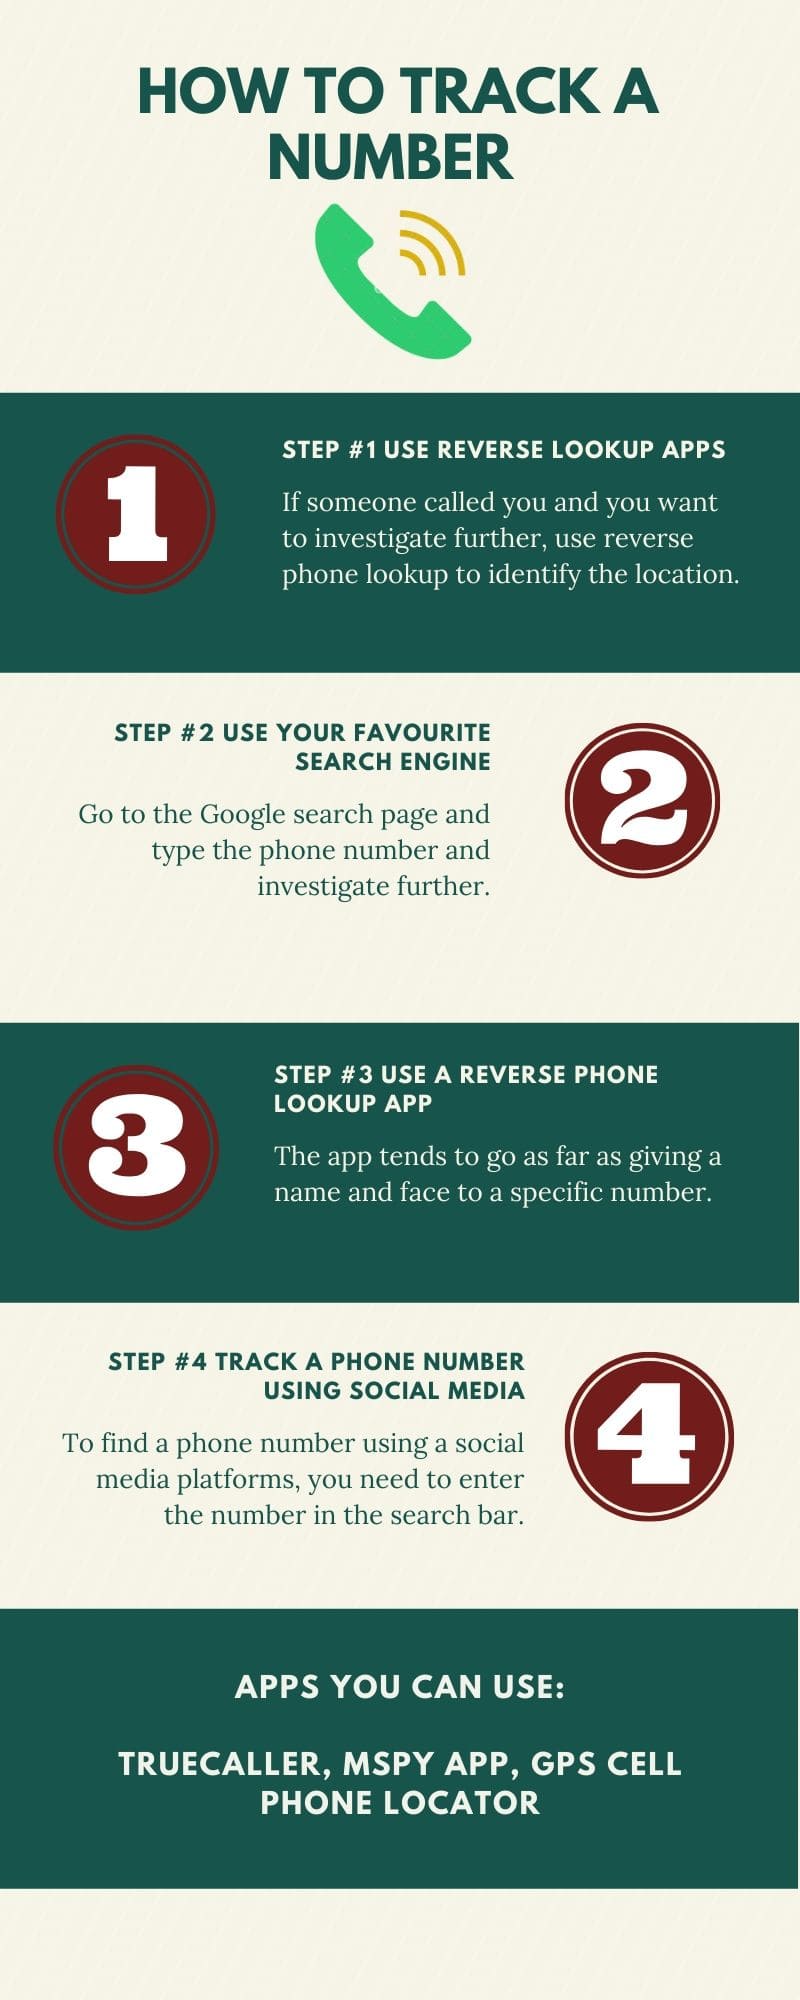 How to track a number in South Africa